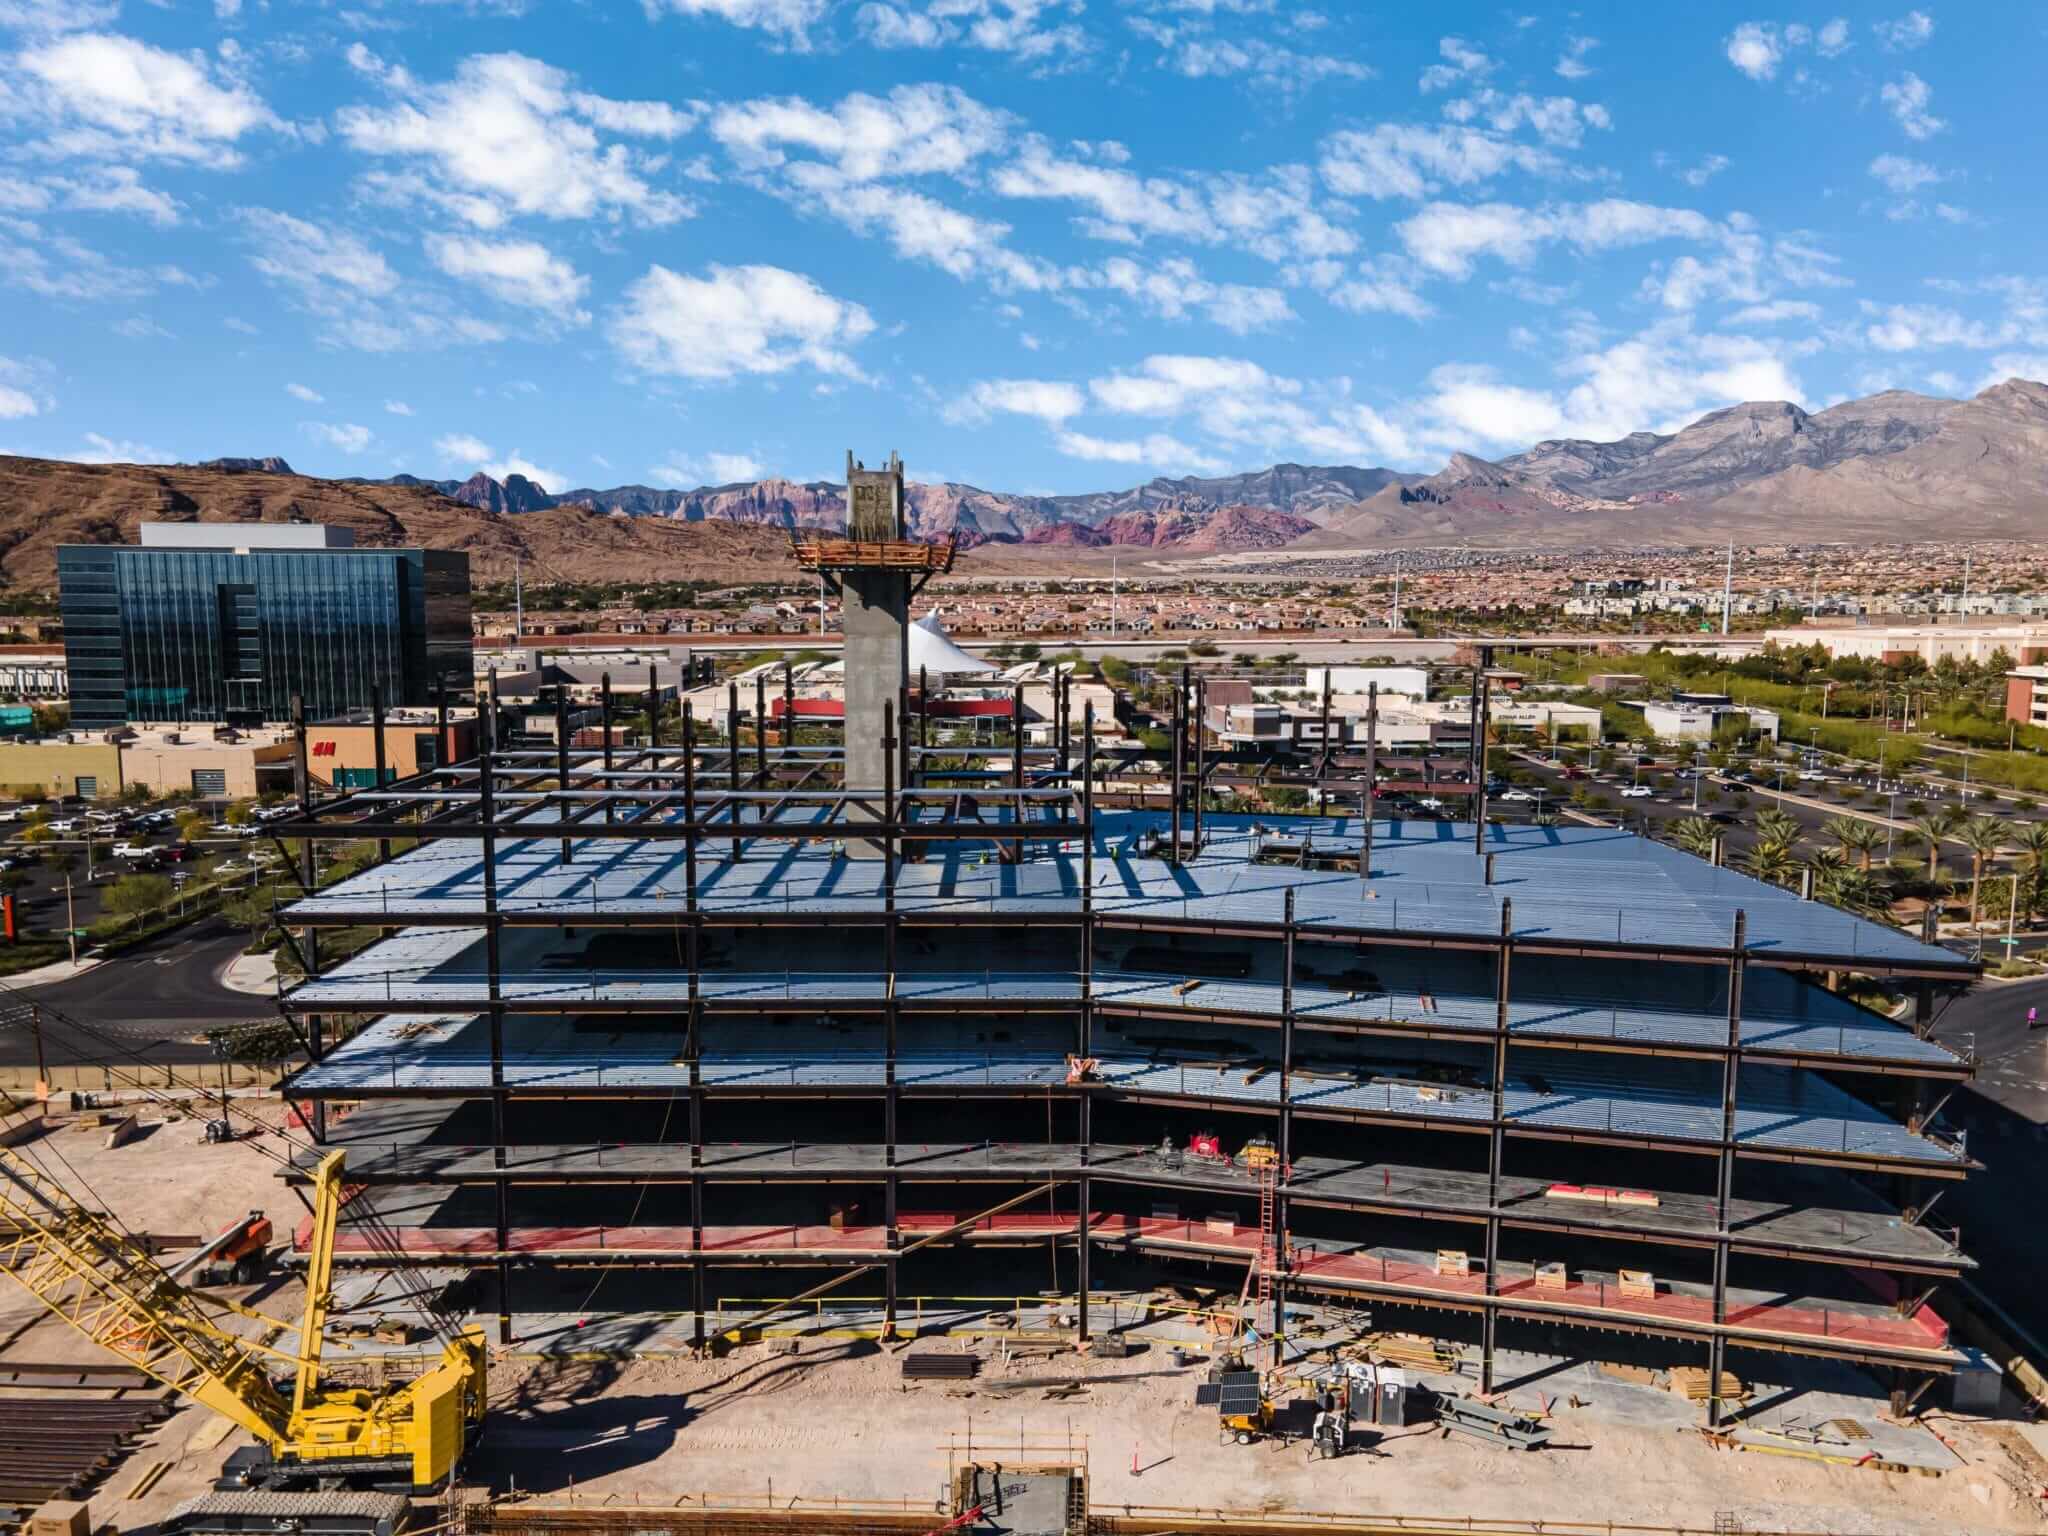 1700 Pavilion under construction in Downtown Summerlin